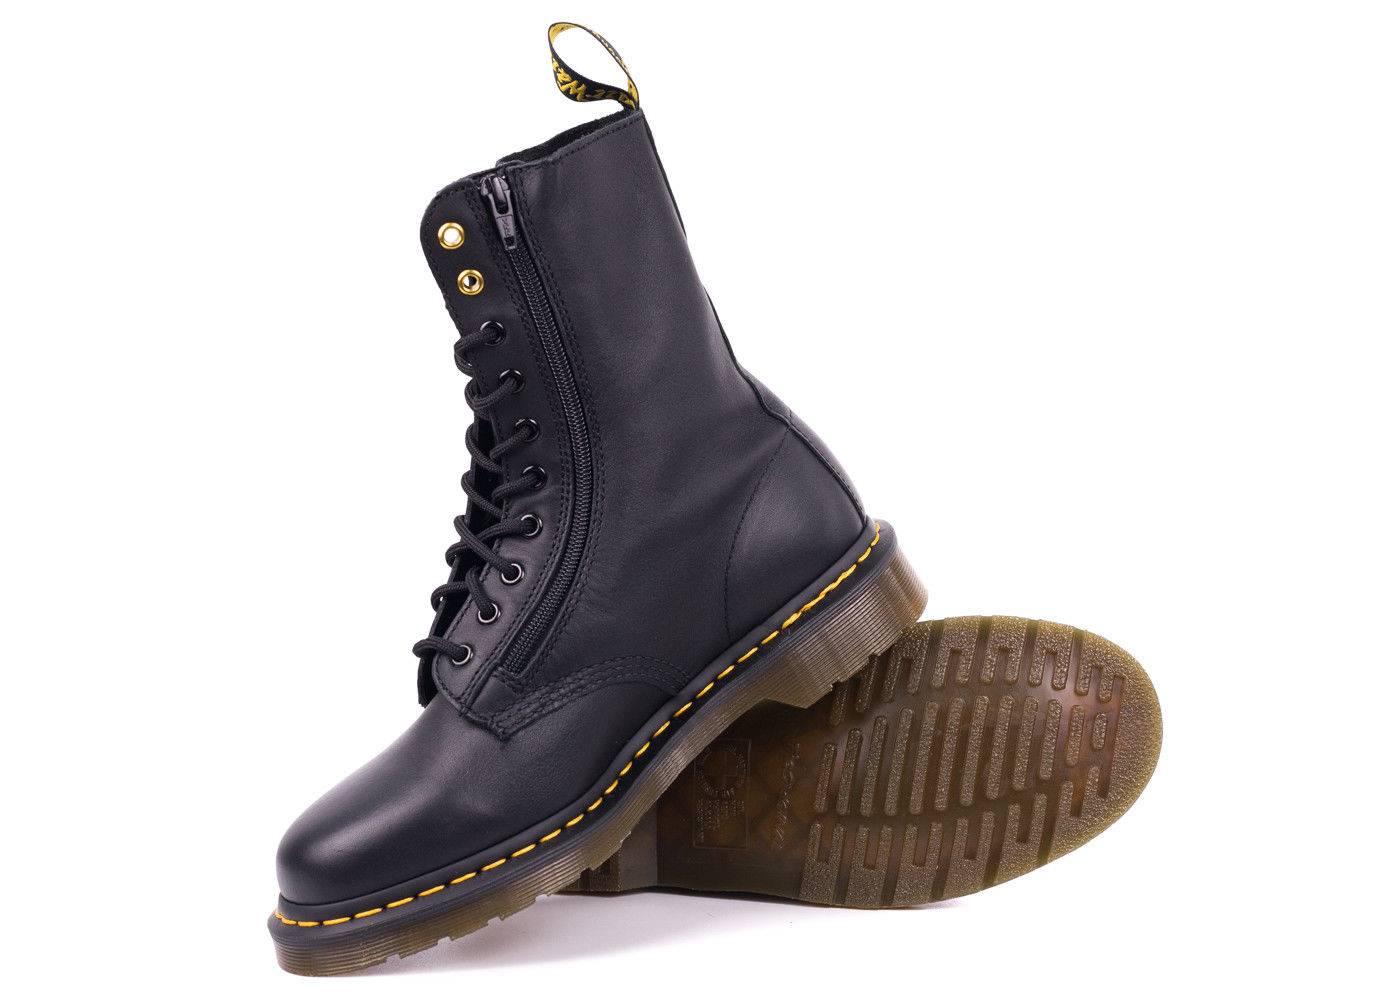 Roll up your denim and throw on your leather jacket with your Limited Edition Dr. Marten Boots. This combat boot features the impeccable Air Wair Soles, Dual Side Zippers, and yellow stitched base. Showcase your special edition Yohji Yamamoto's